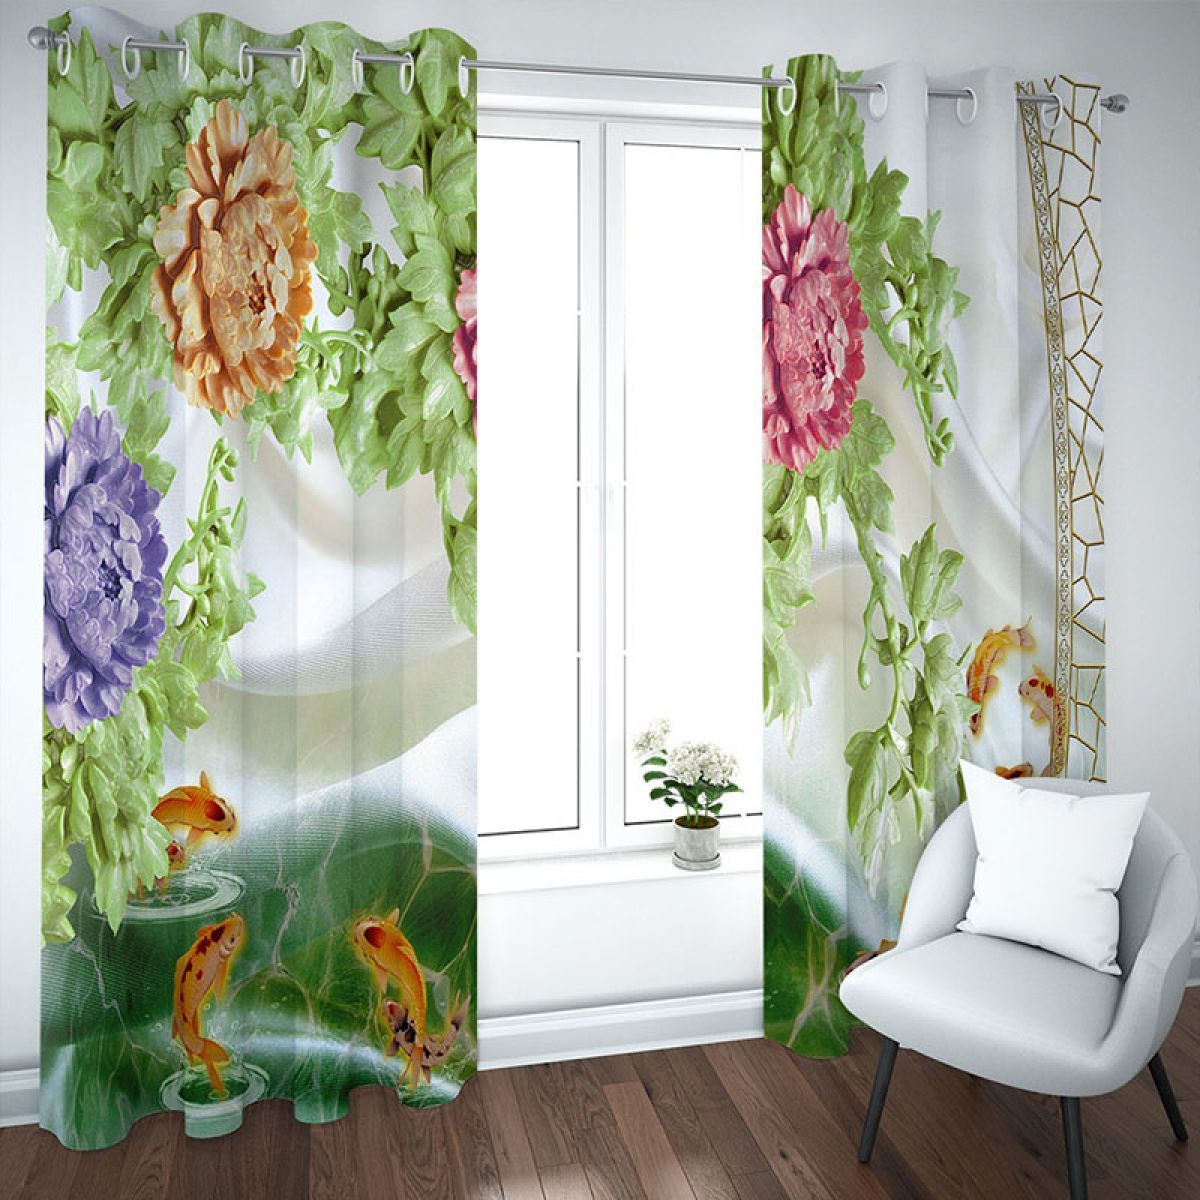 Fishes And Peonies Printed Window Curtain Home Decor